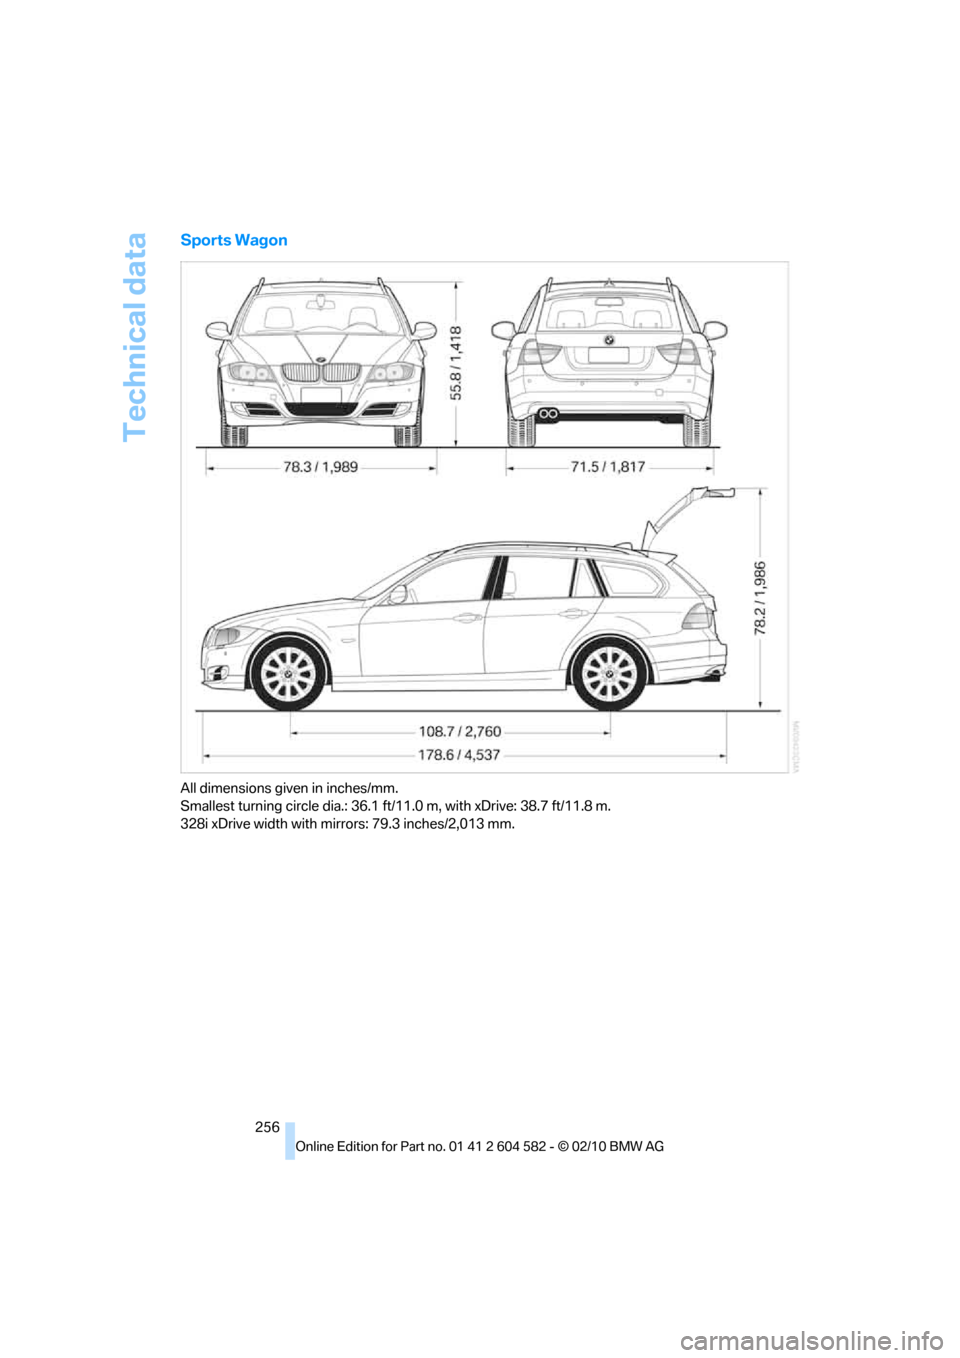 BMW 323I 2011 E90 Owners Manual Technical data
256
Sports Wagon
All dimensions given in inches/mm. 
Smallest turning circle dia.: 36.1 ft/11.0 m, with xDrive: 38.7 ft/11.8 m.
328i xDrive width with mirrors: 79.3 inches/2,013 mm. 